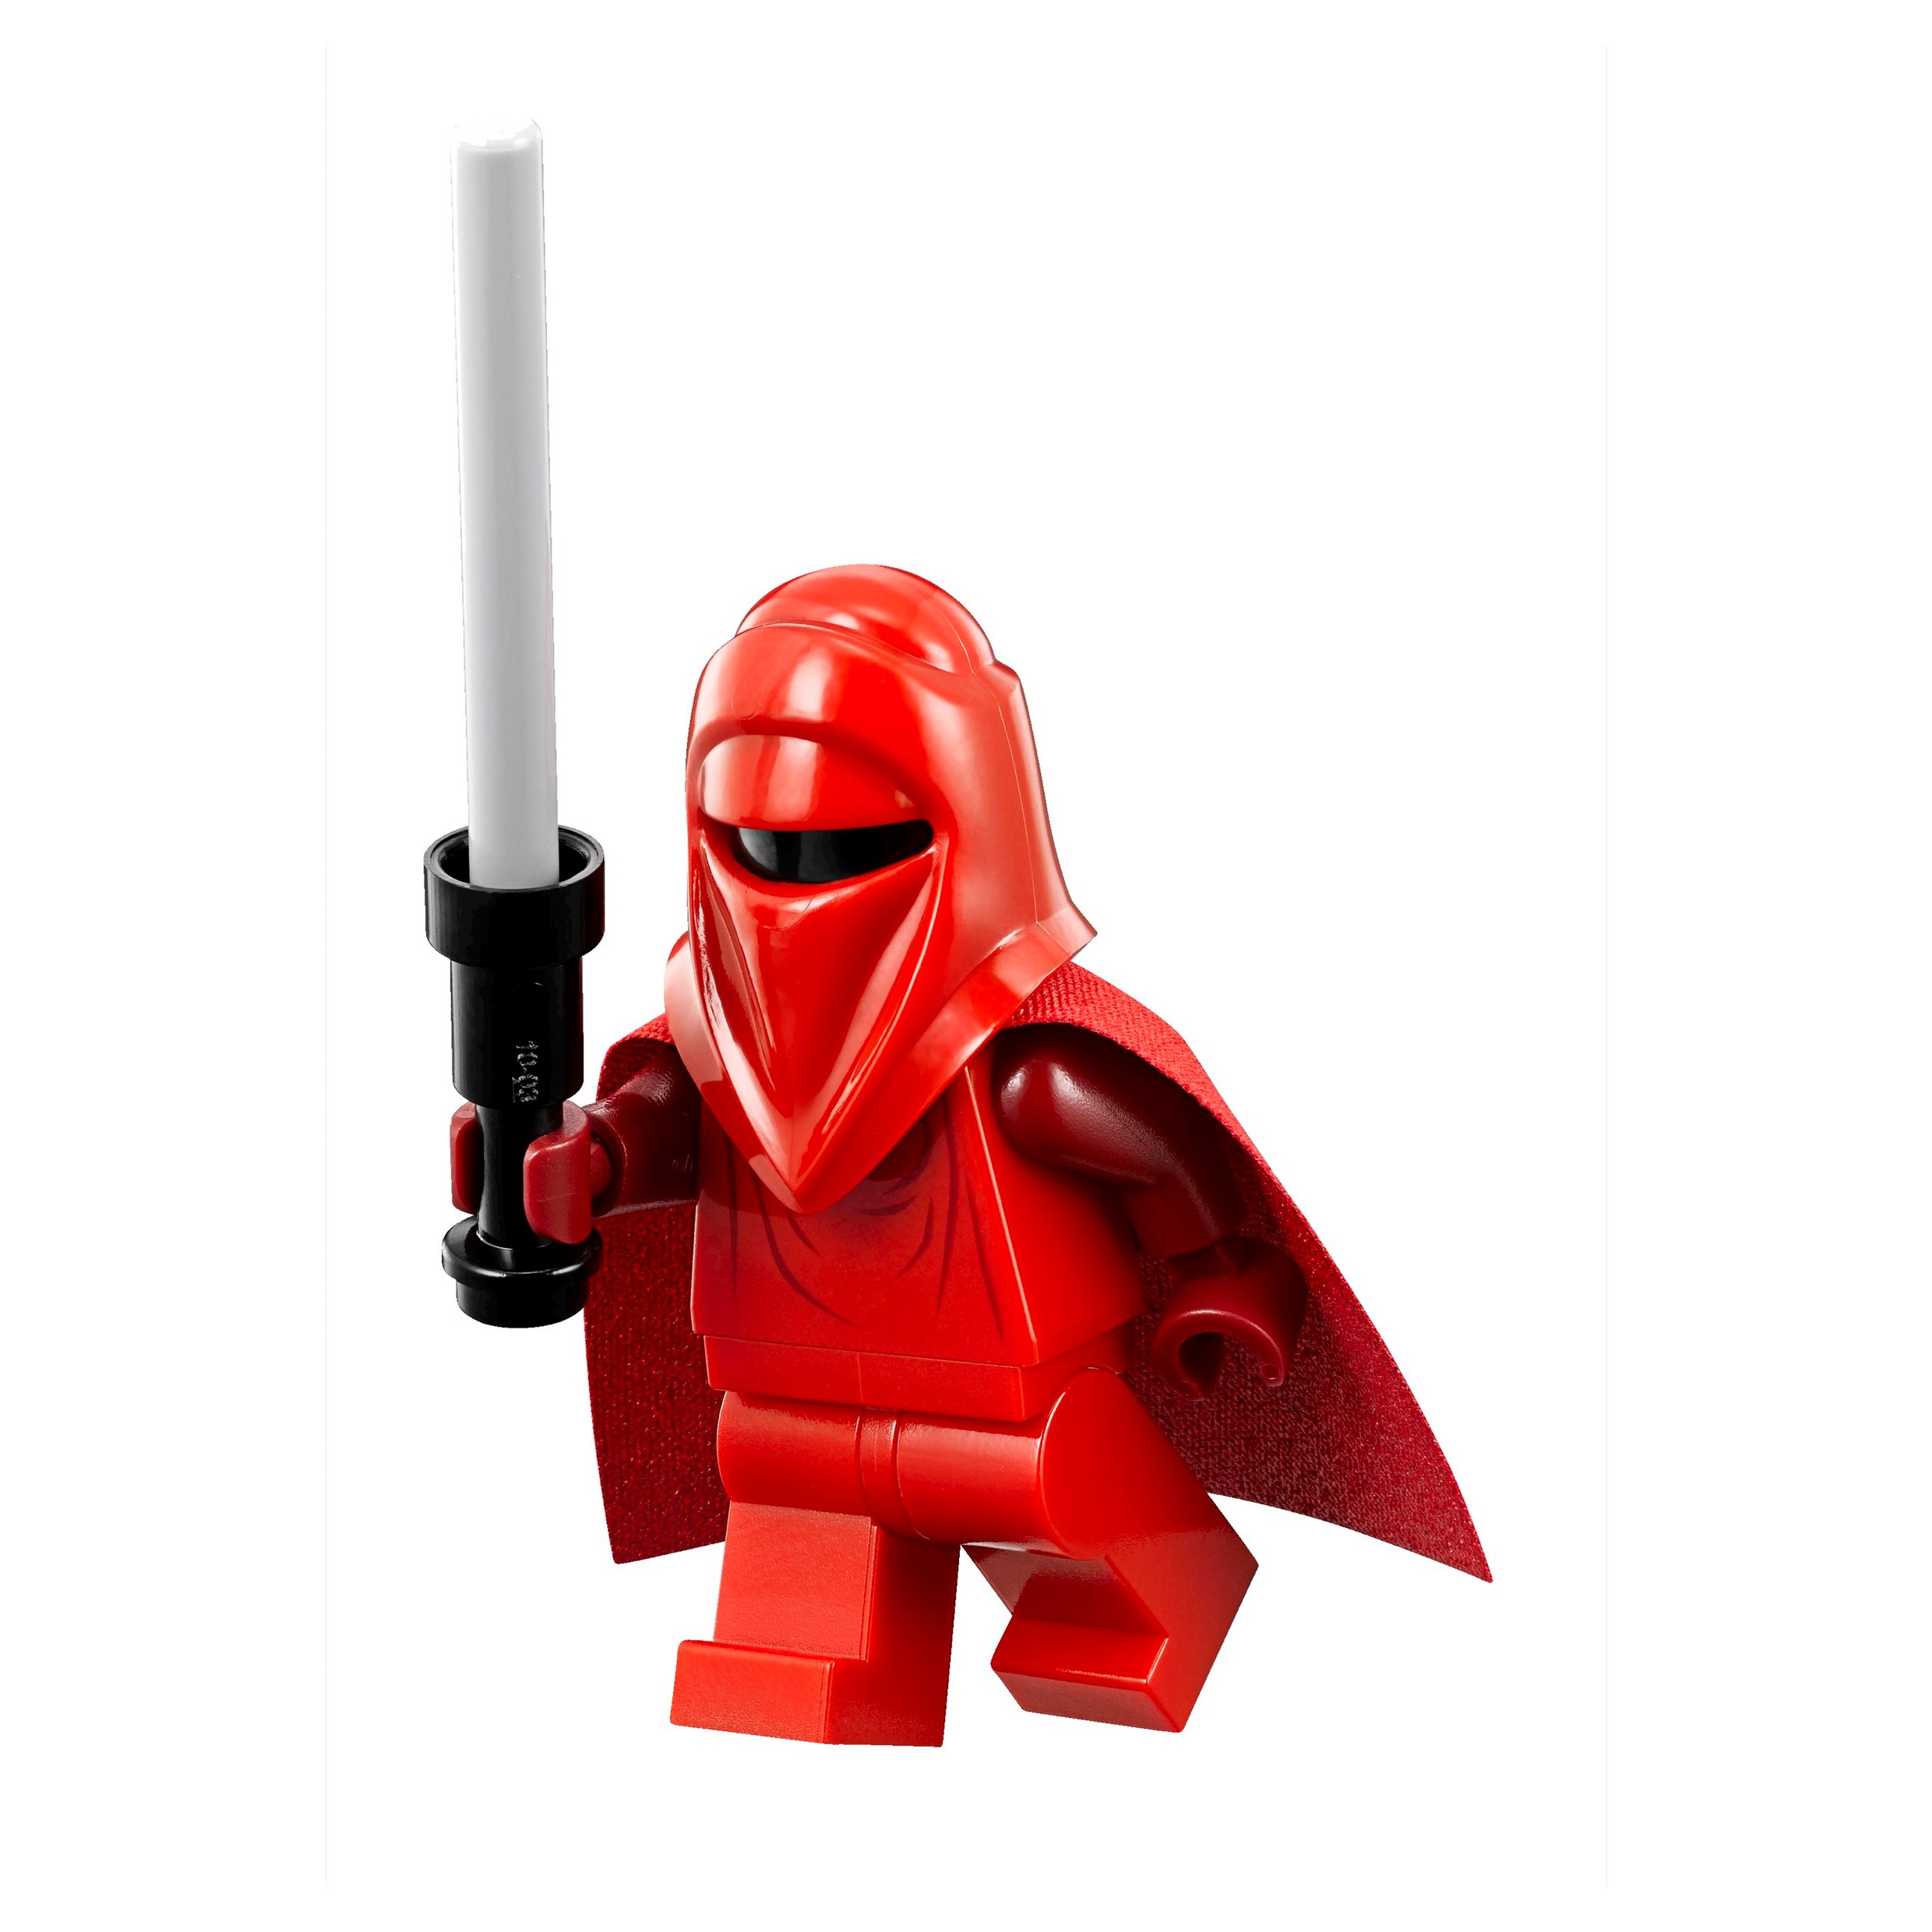 GENUINE LEGO STAR WARS Emperor's Royal Red Guard Minifig NEW 